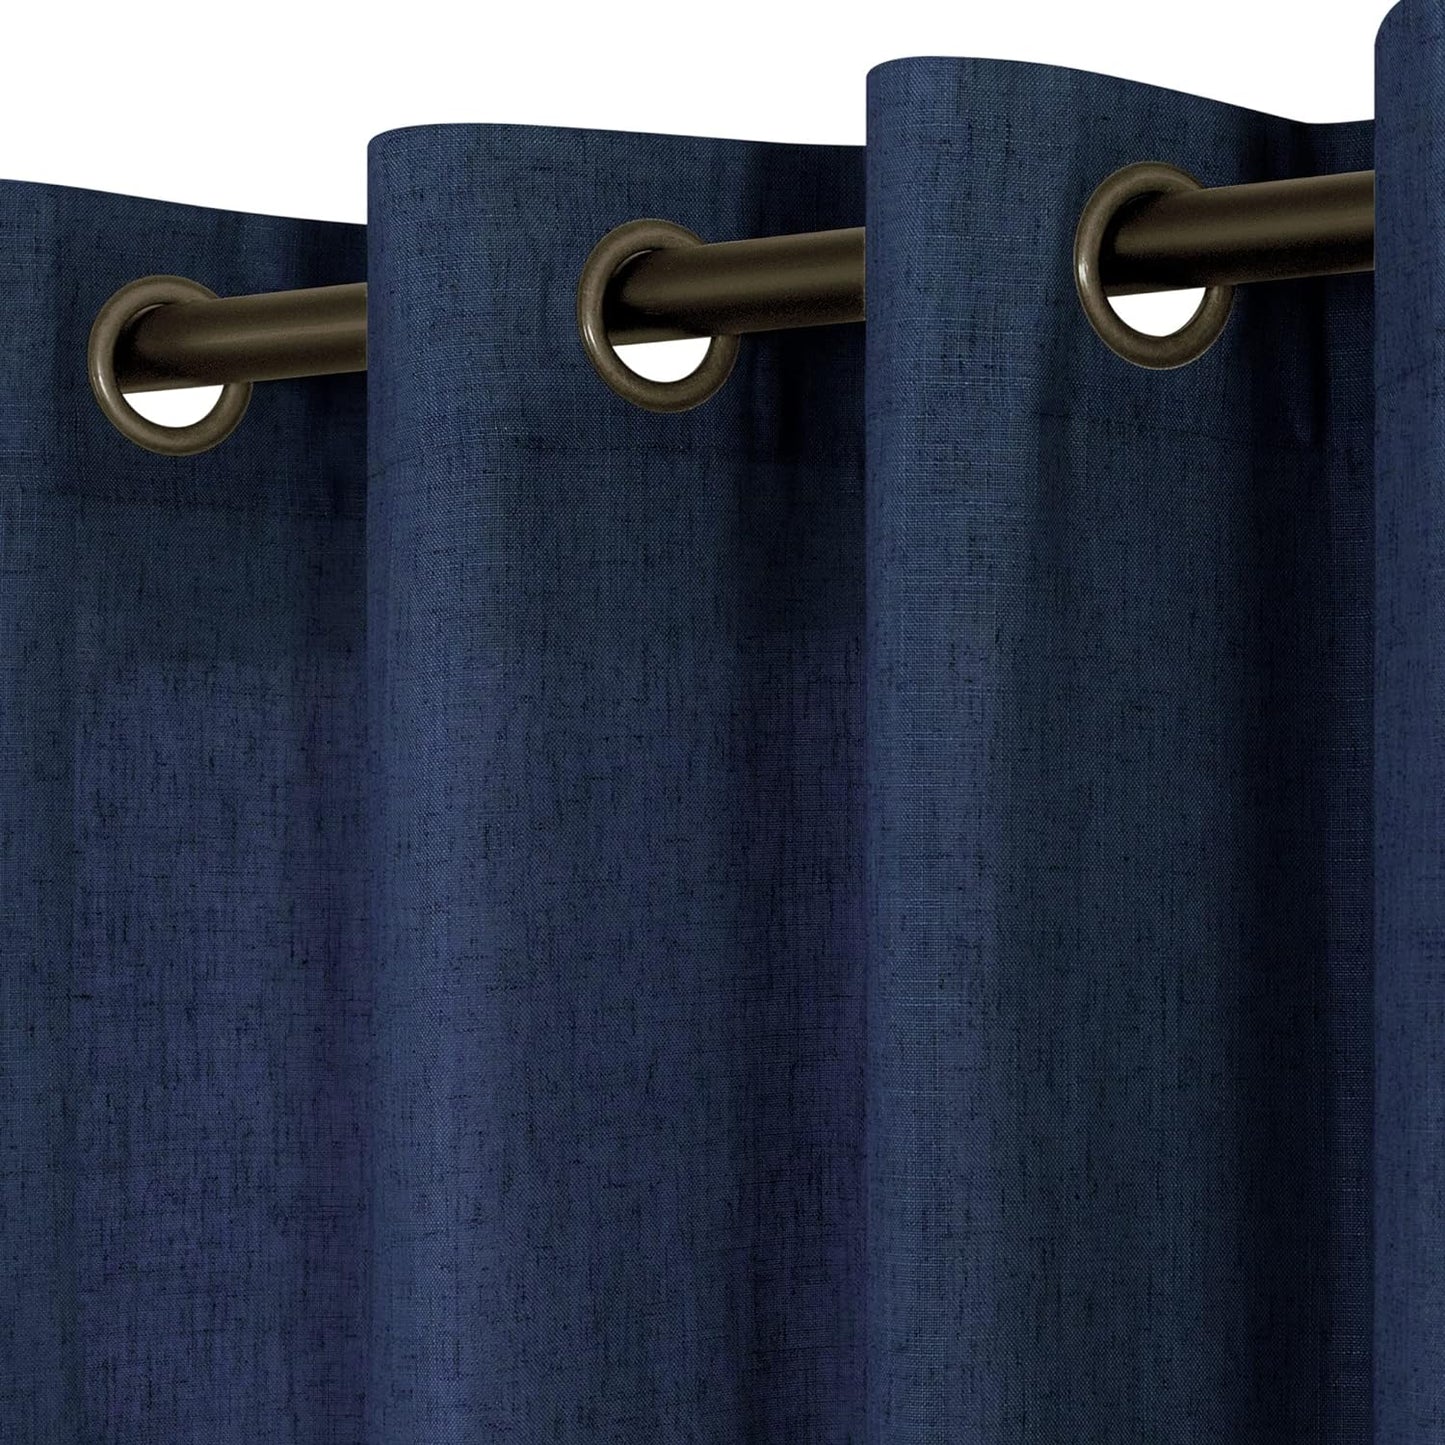 KOUFALL Beige Rustic Country Curtains for Living Room 84 Inches Long Flax Linen Bronze Grommet Tan Sand Color Solid Faux Linen Curtains for Bedroom Sliding Glass Patio Door 2 Panels  KOUFALL TEXTILE Navy Blue 52X108 